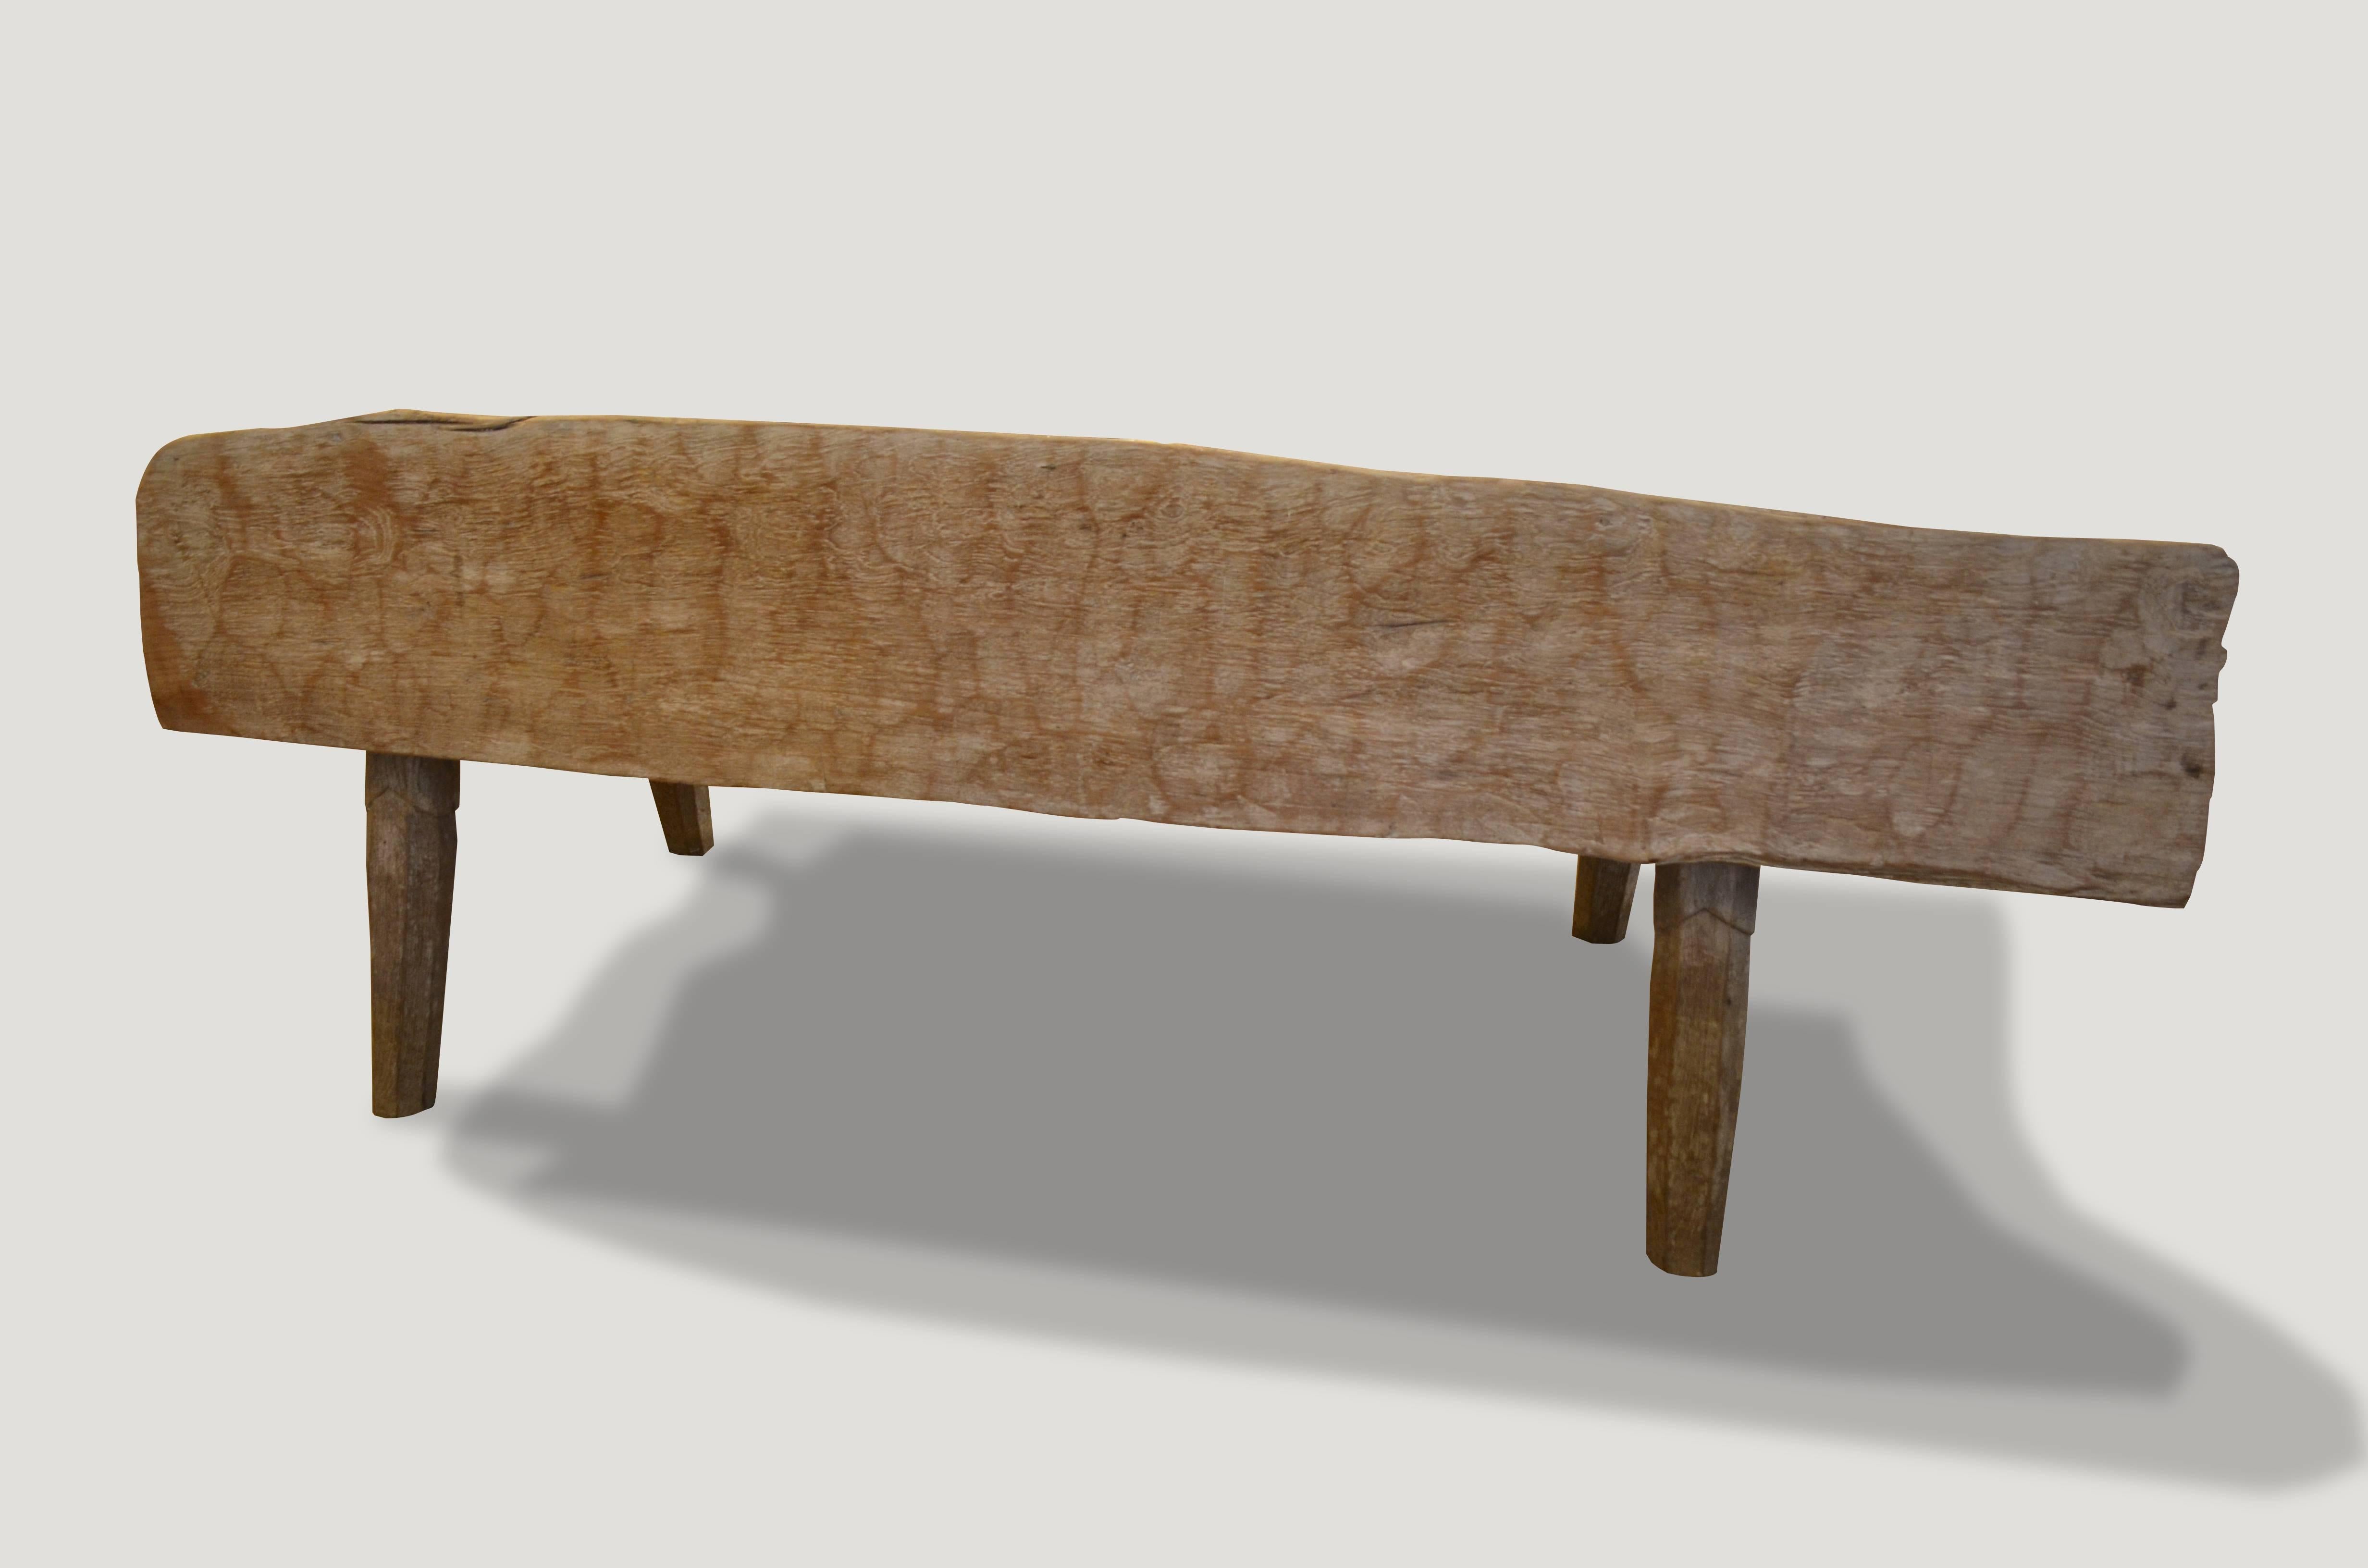 Andrianna Shamaris Museum Quality Wabi-Sabi Teak Wood Bench In Excellent Condition For Sale In New York, NY